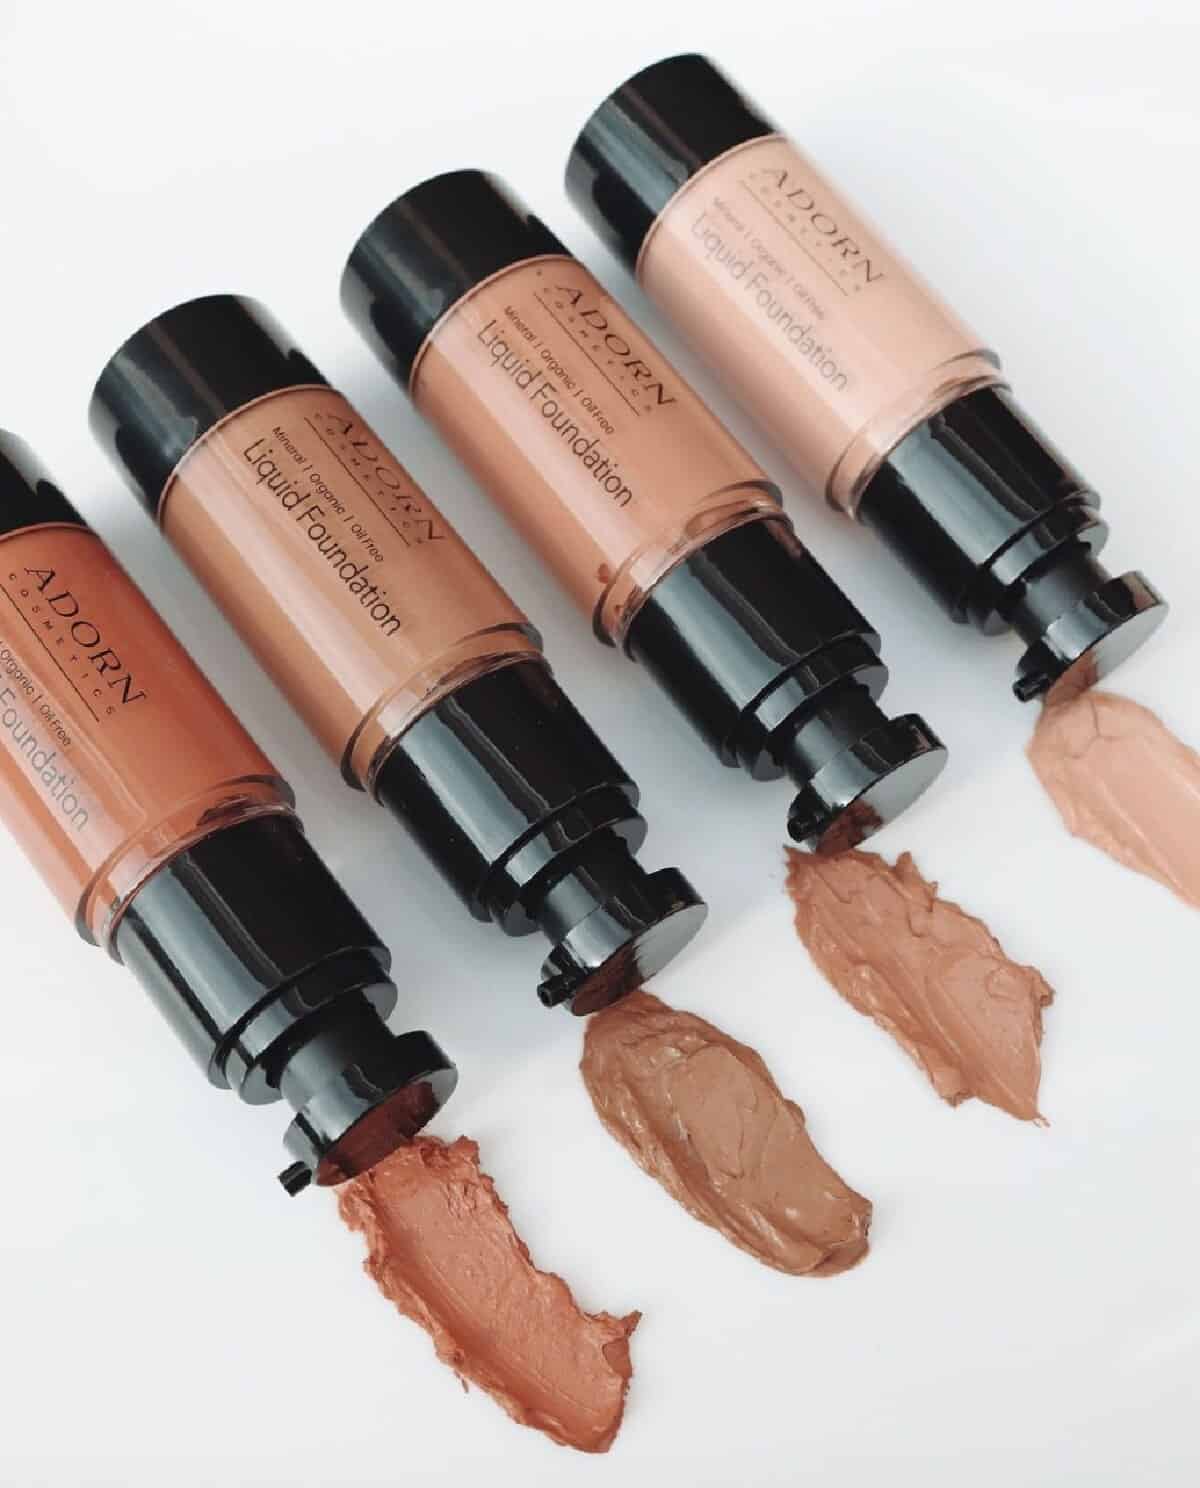 Four bottles of Adorn Cosmetics liquid foundation on a white background laying on their side diagonally with a sample of the color shade shown in front of the dispensing nozzle.